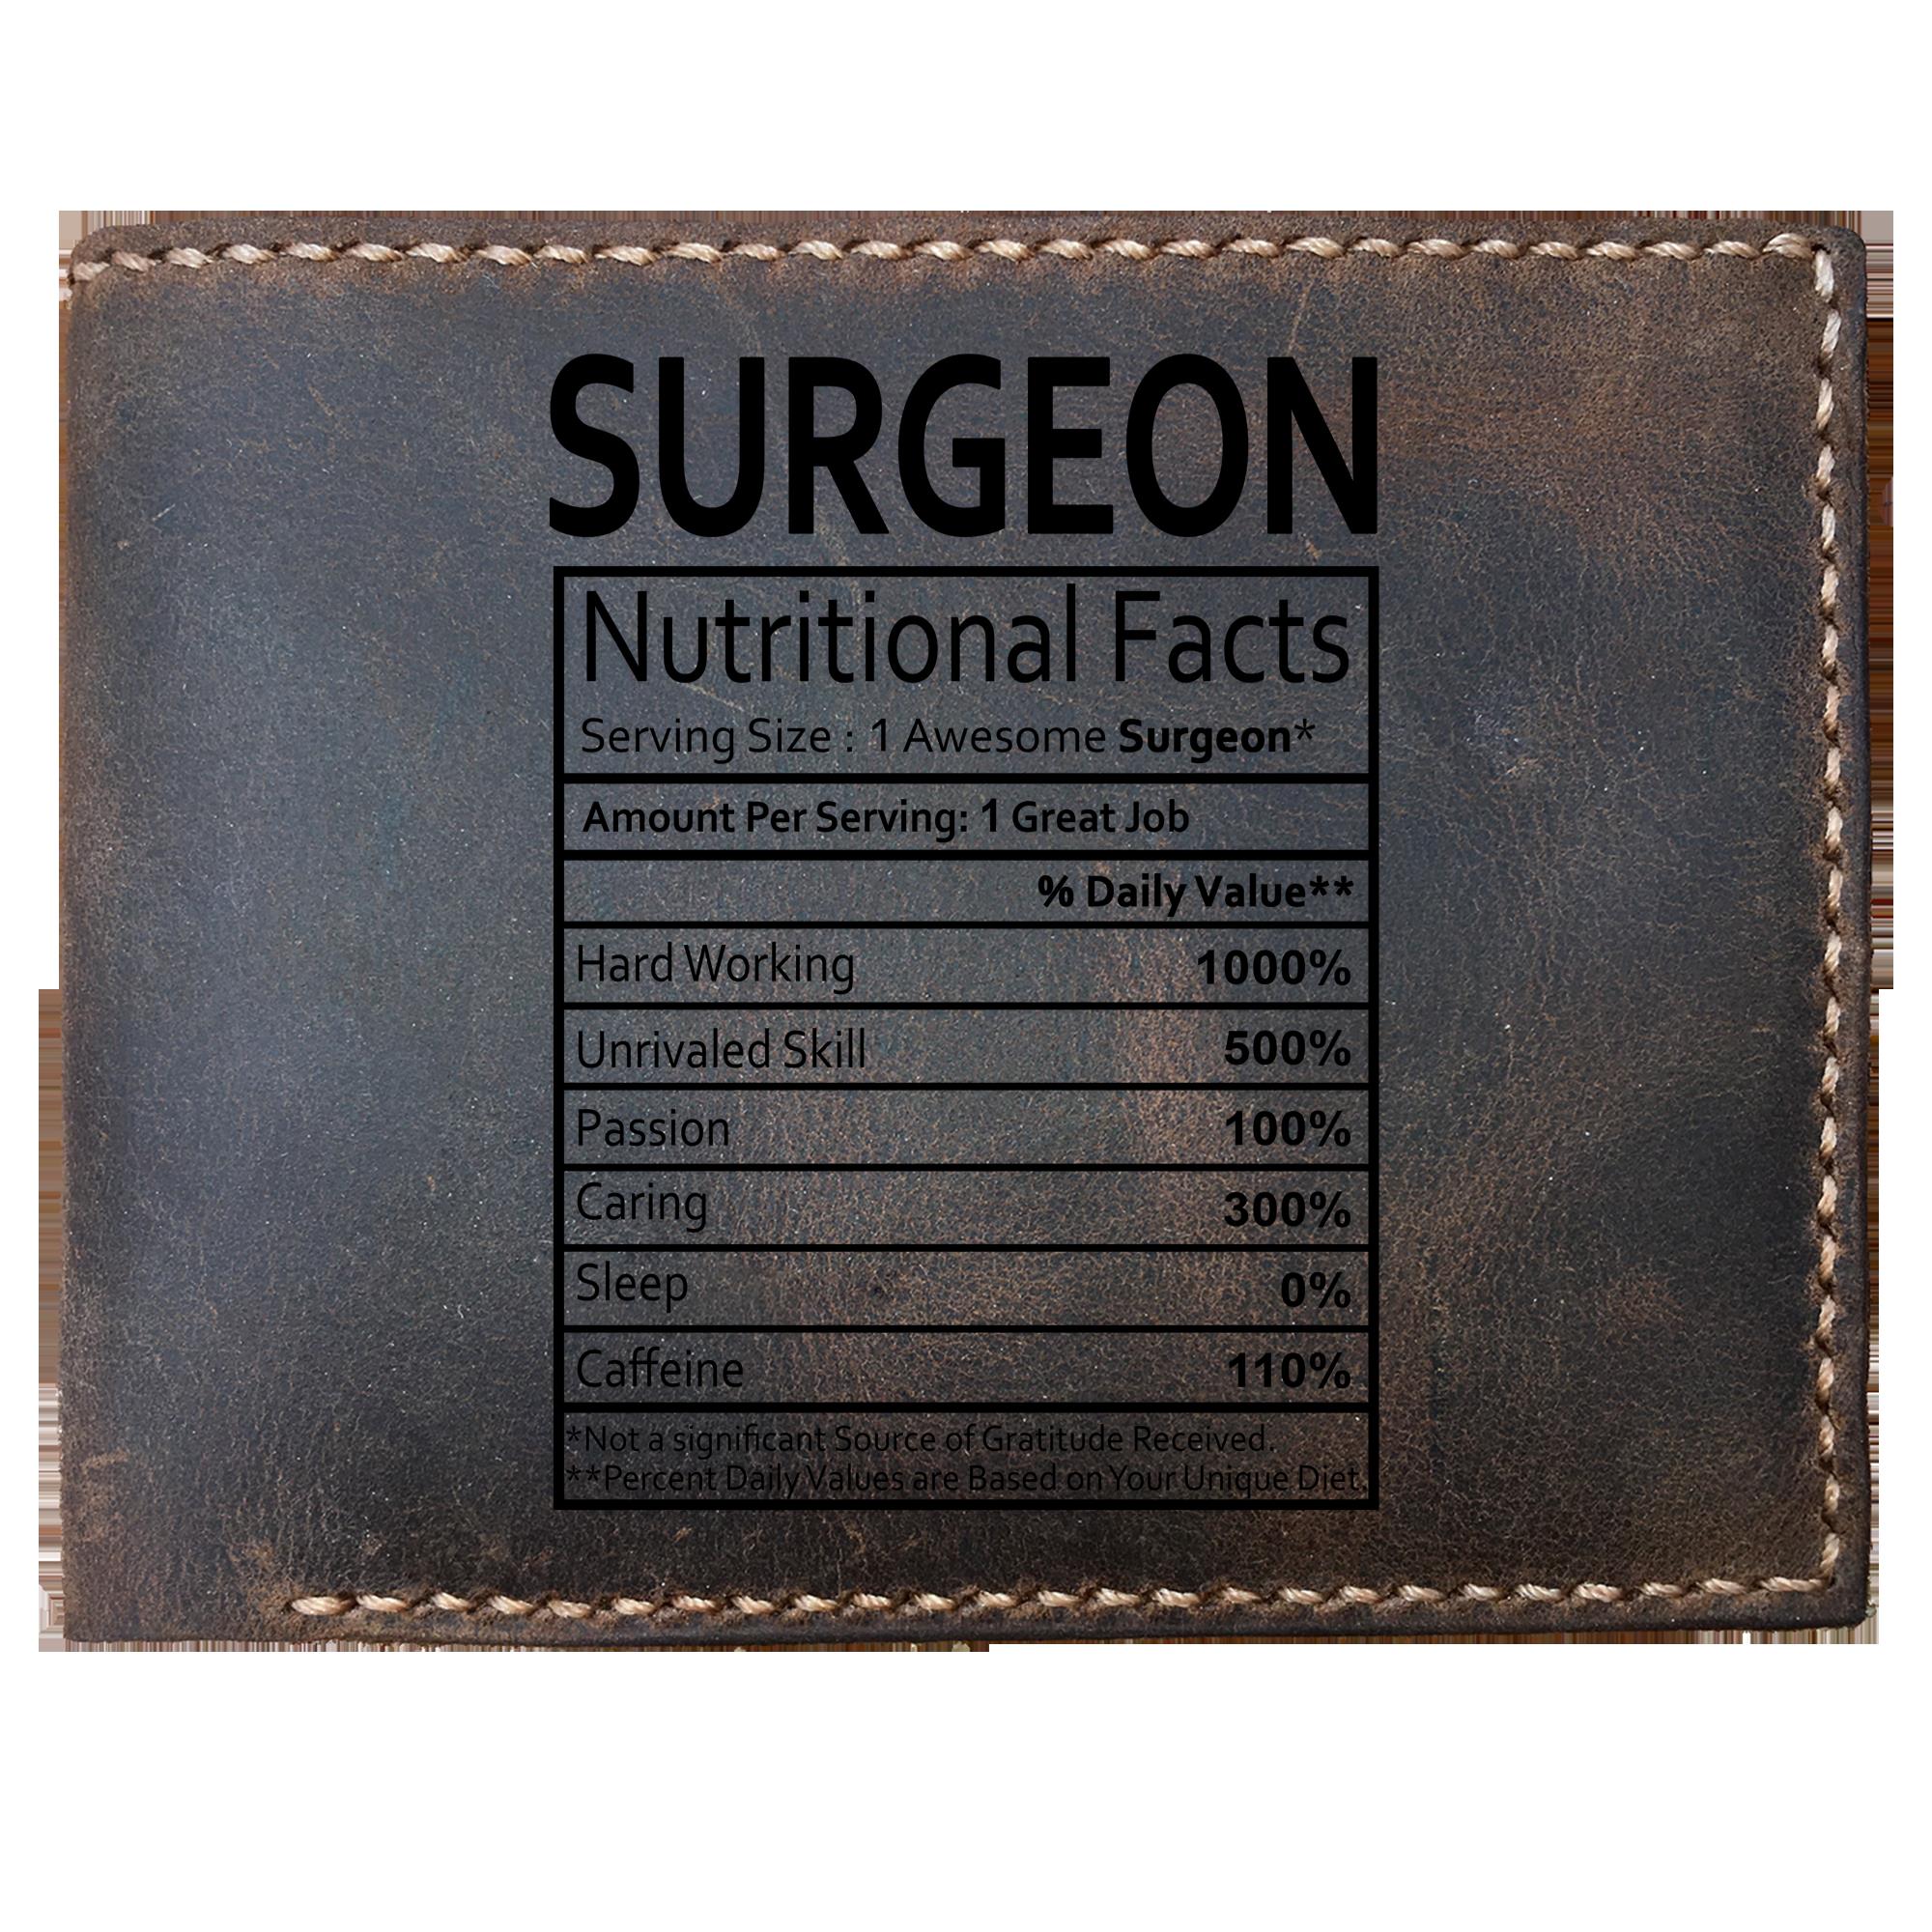 Skitongifts Funny Custom Laser Engraved Bifold Leather Wallet For Men, Surgeon Nutritional Facts